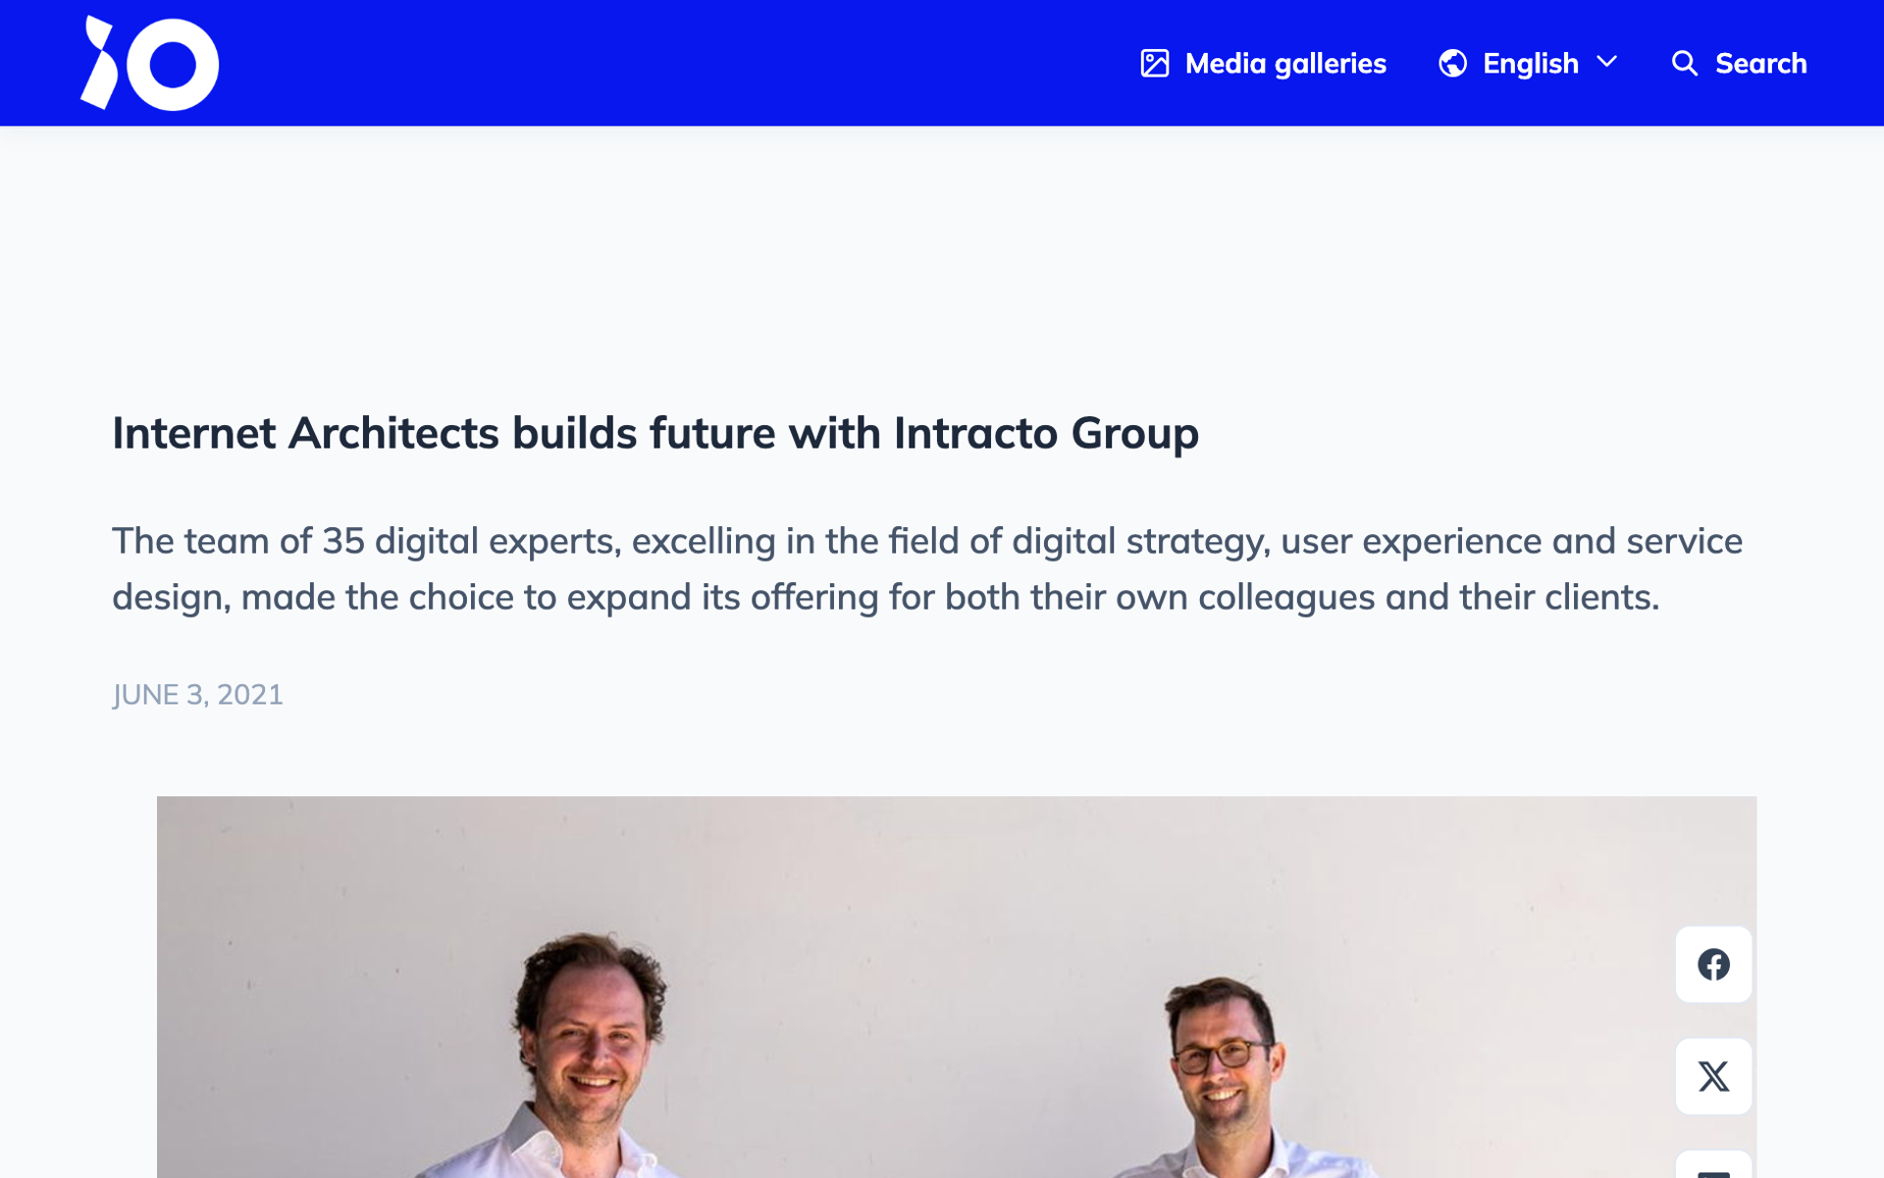 Internet Architects builds future with Intracto Group